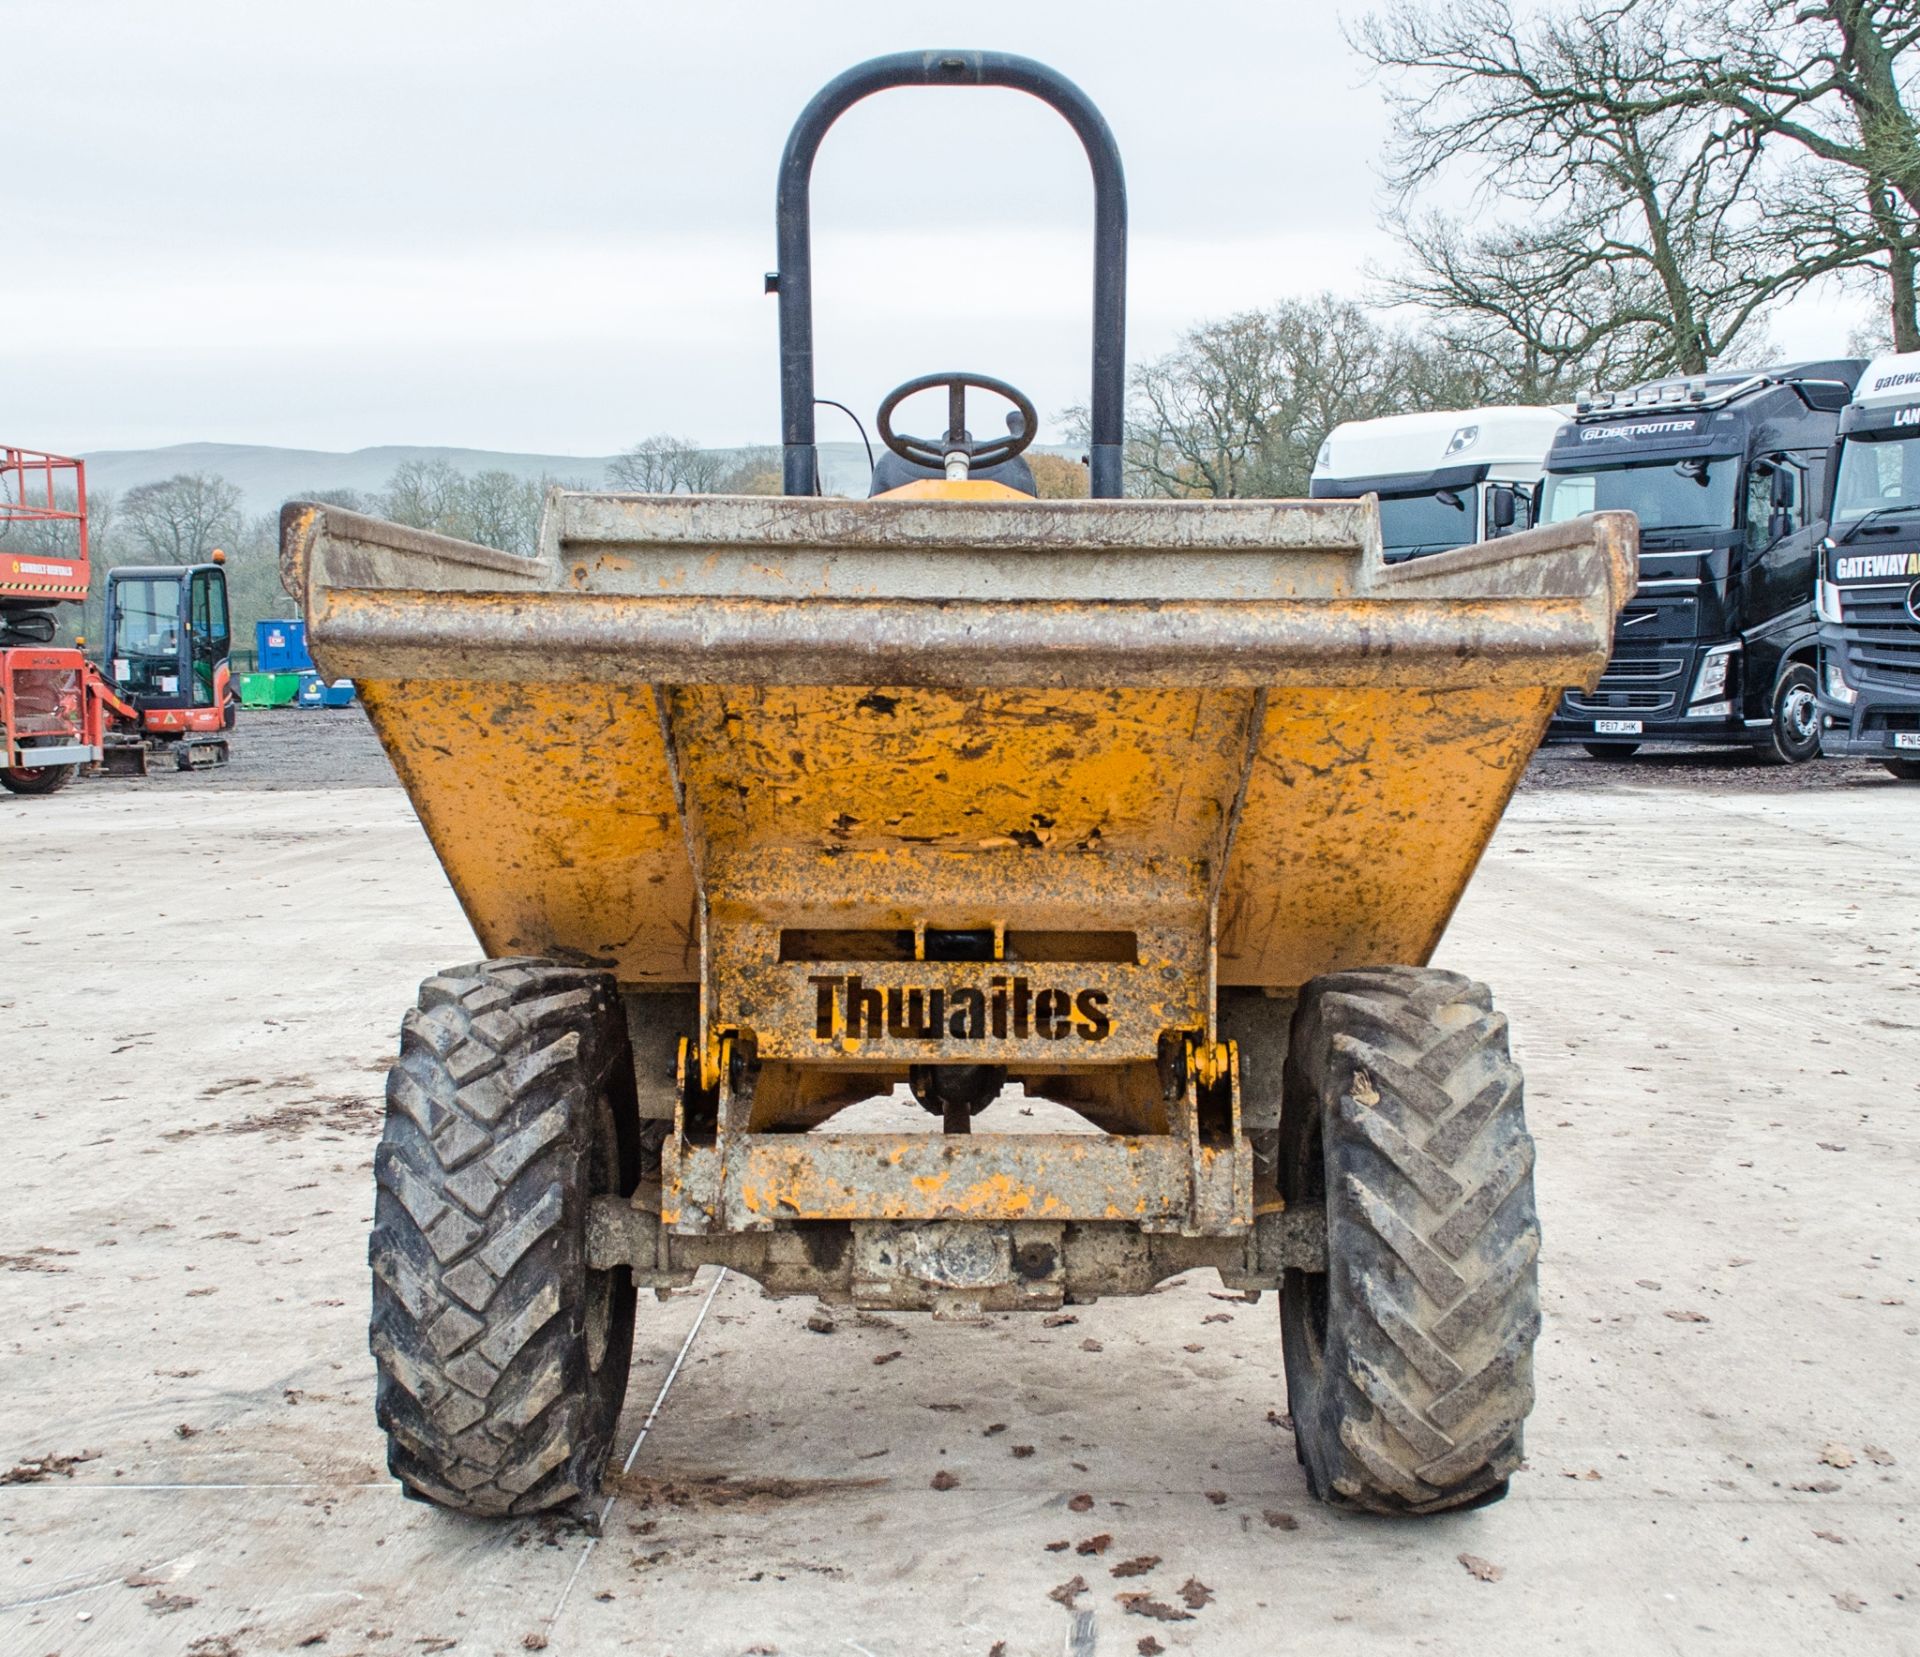 Thwaites 3 tonne straight skip dumper Year: 2016 S/N: 1610D3798 Recorded Hours: Not displayed (Clock - Image 5 of 23